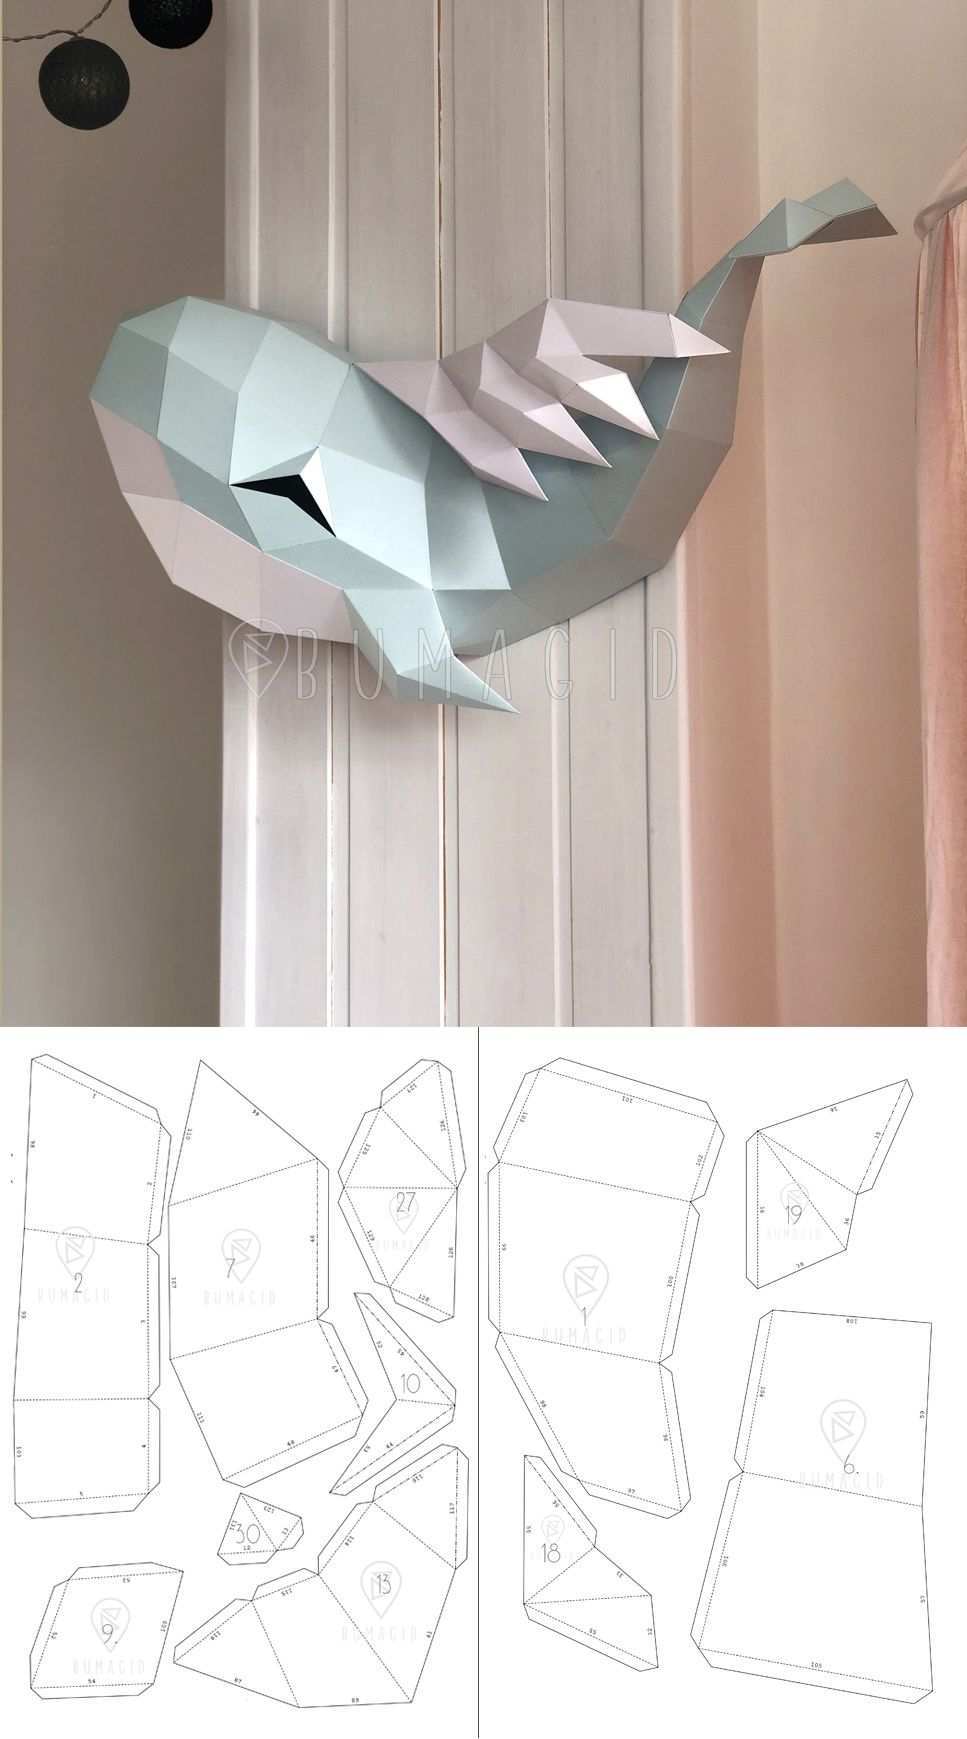 Pdf Template Whale Low Poly Whale Model Origami Papercraft Etsy Paper Crafts Origami Paper Crafts Diy Paper Crafts Diy Tutorials